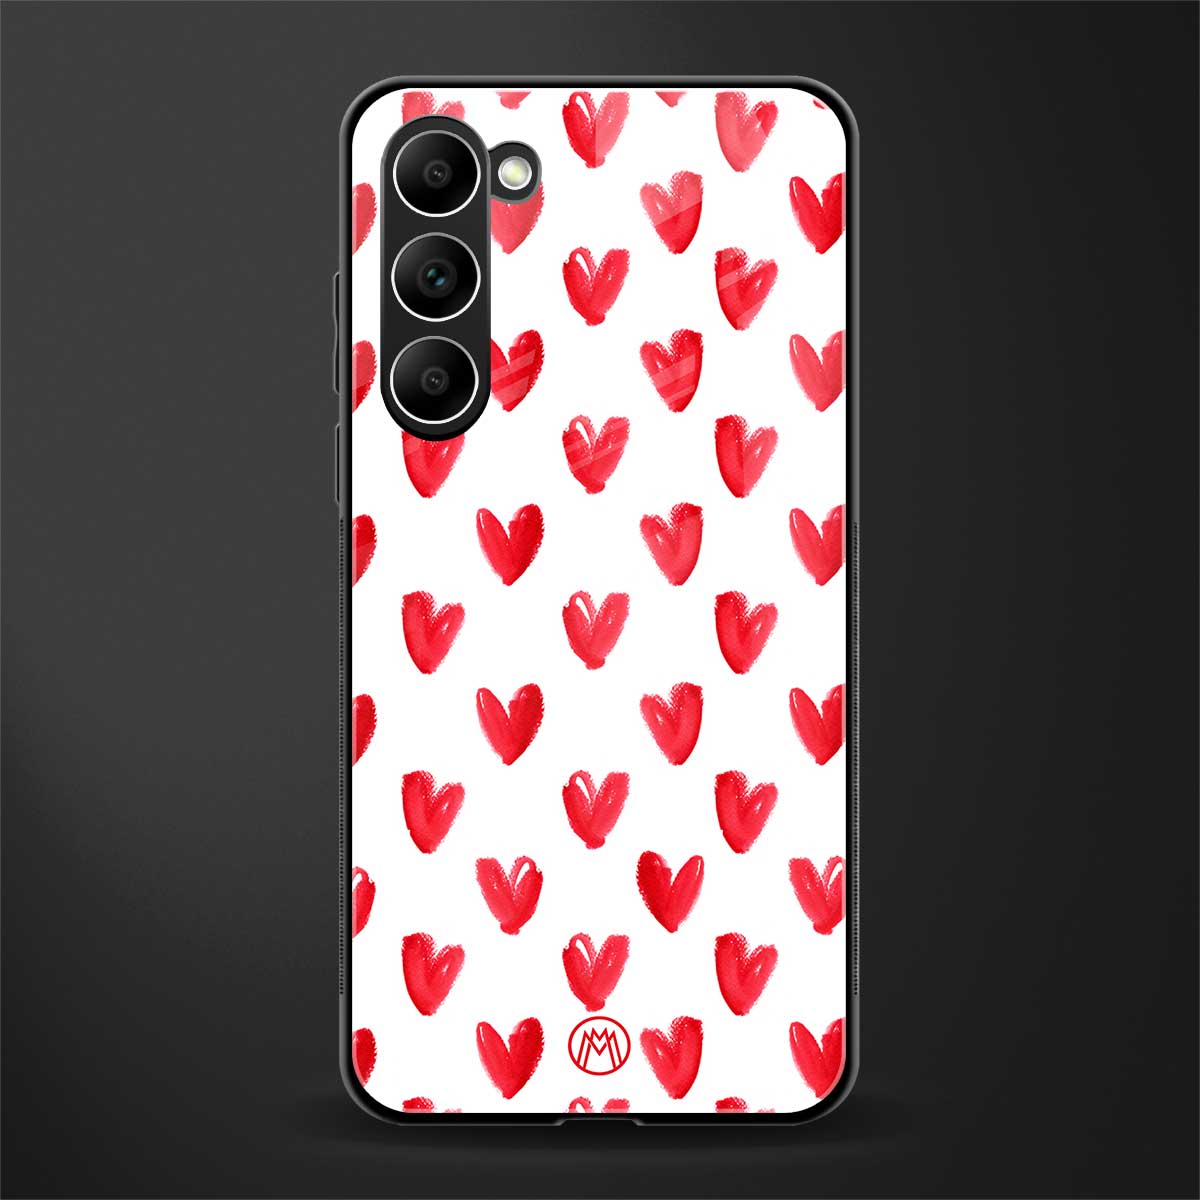 love is love glass case for phone case | glass case for samsung galaxy s23 plus